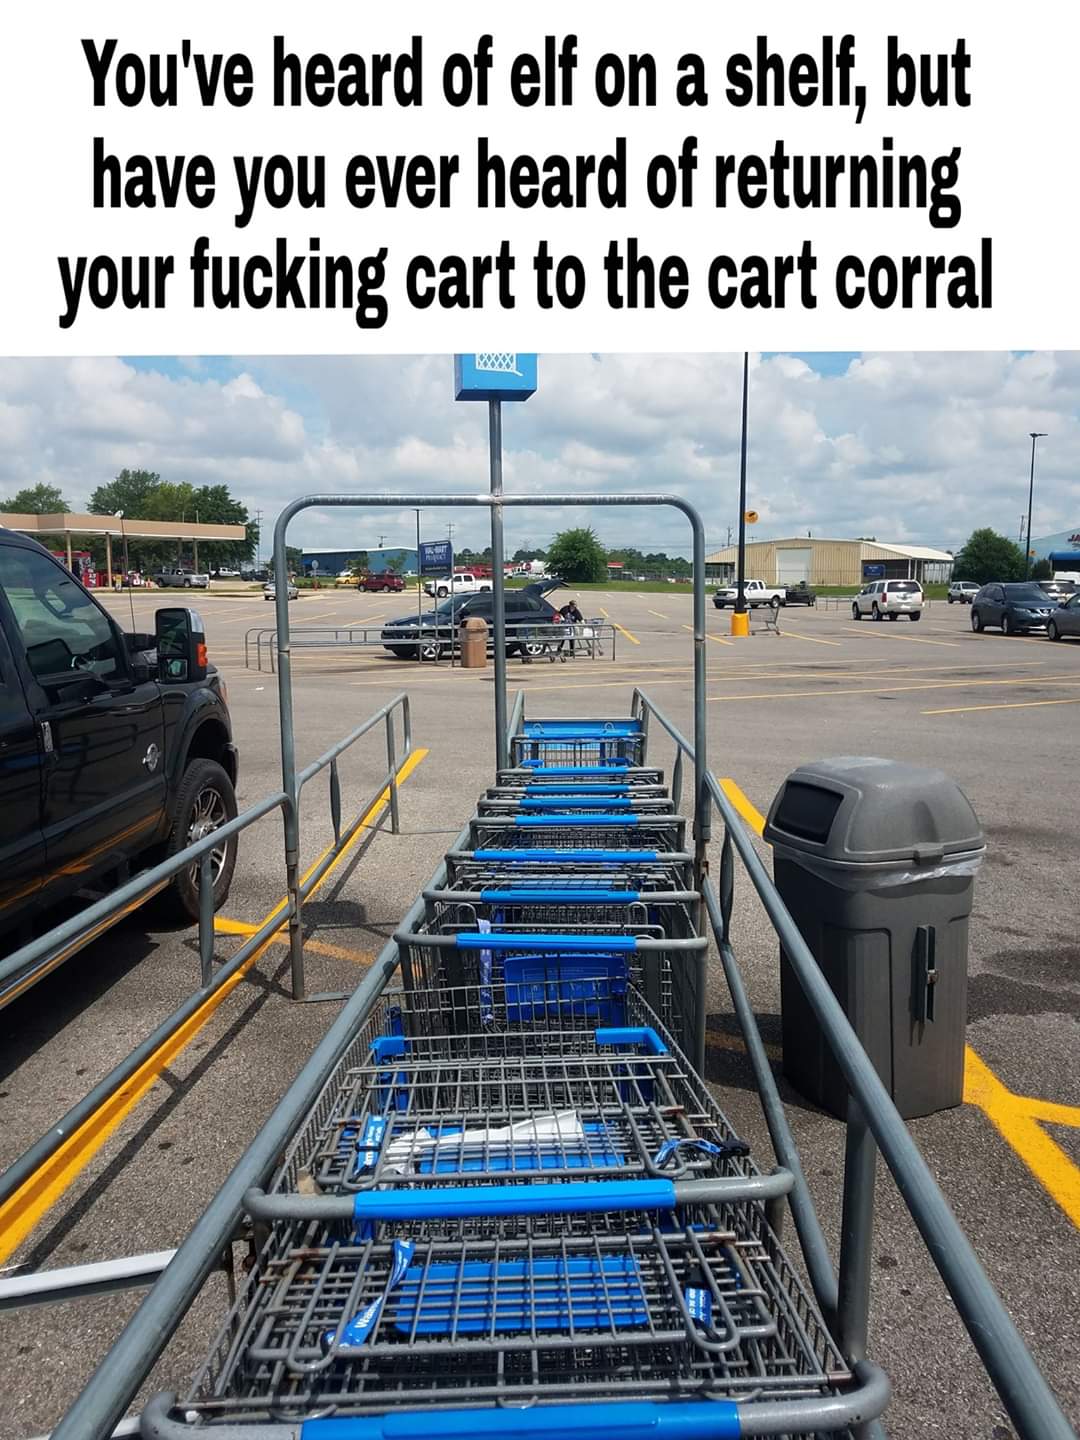 asphalt - You've heard of elf on a shelf, but have you ever heard of returning your fucking cart to the cart corral F On